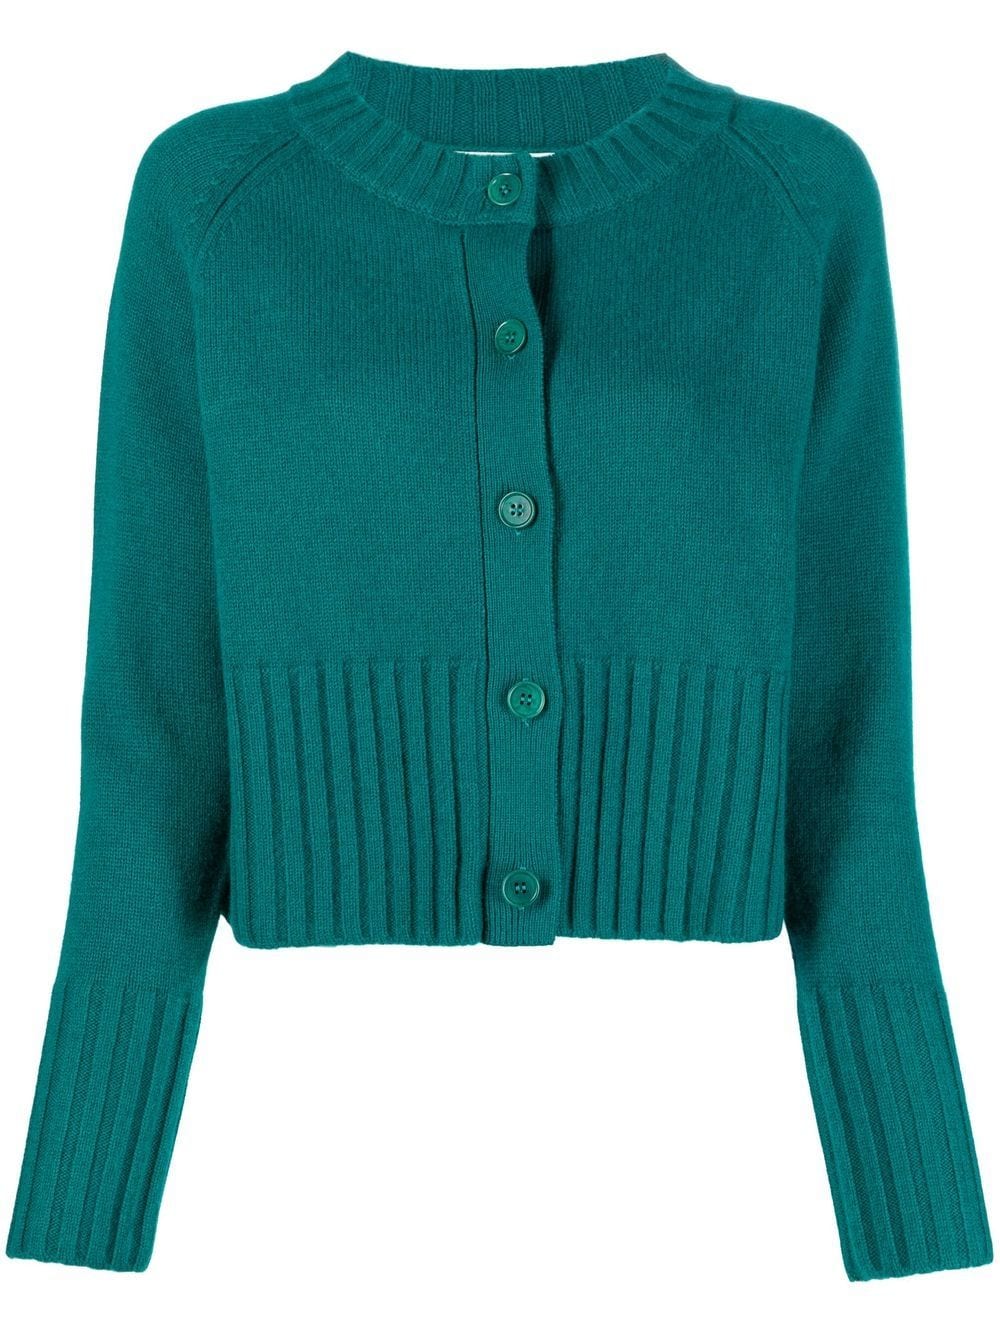 P.A.R.O.S.H. knitted cropped cardigan - Green von P.A.R.O.S.H.